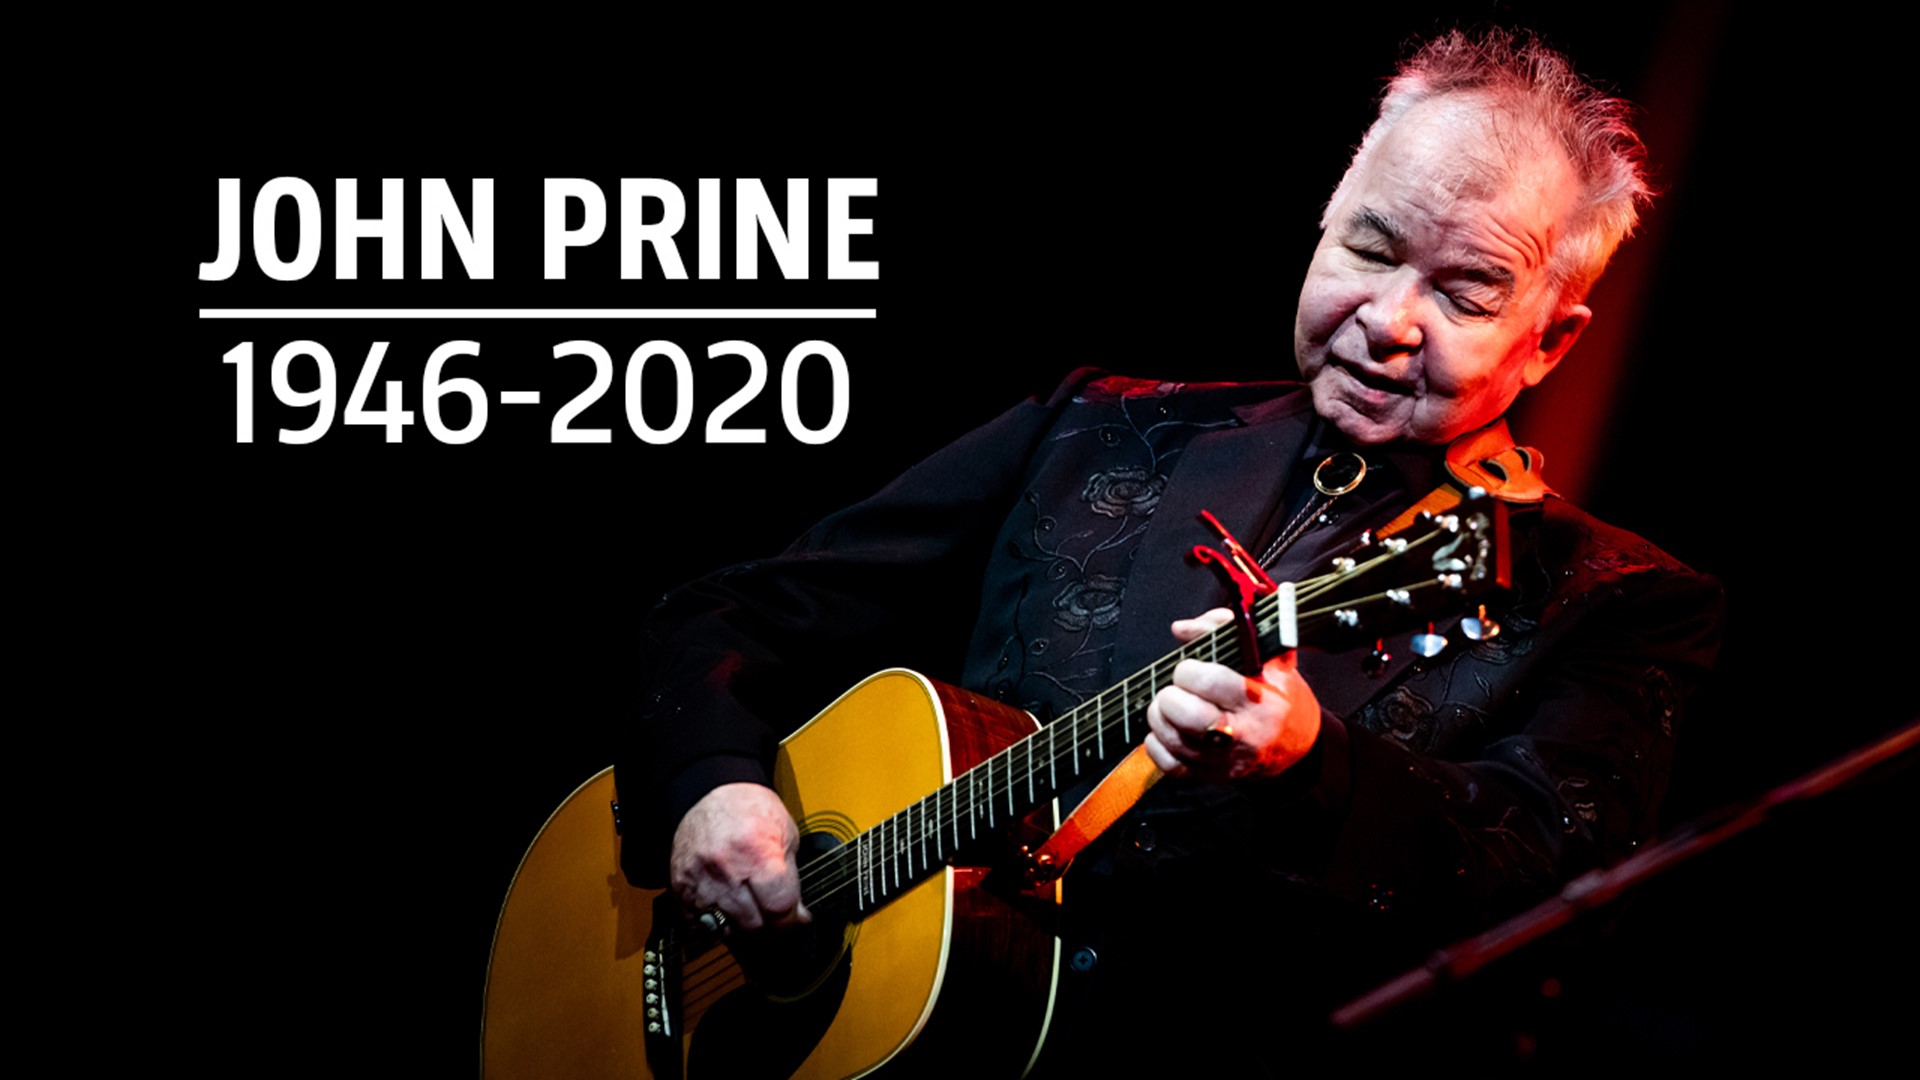 One of the most influential Country and Folk singer-songwriters ever, John Prine has passed away at the age of 73. He died on a ventilator due to COVID-19 issues.